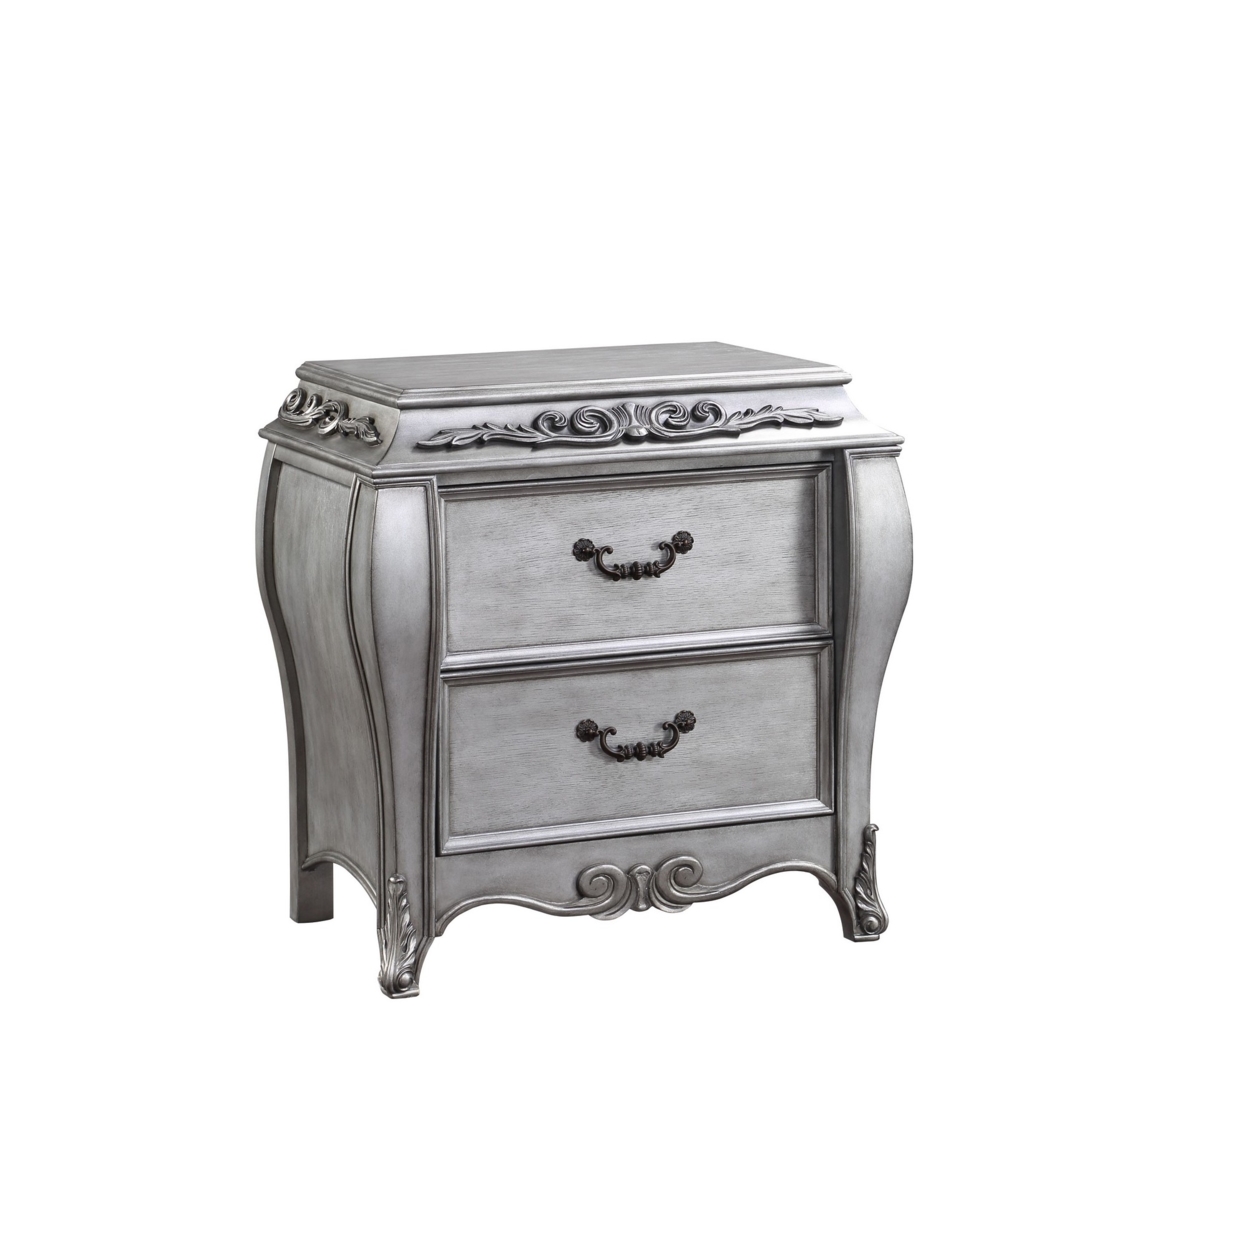 Nightstand With Moldings And Raised Floral Motifs, Gray- Saltoro Sherpi